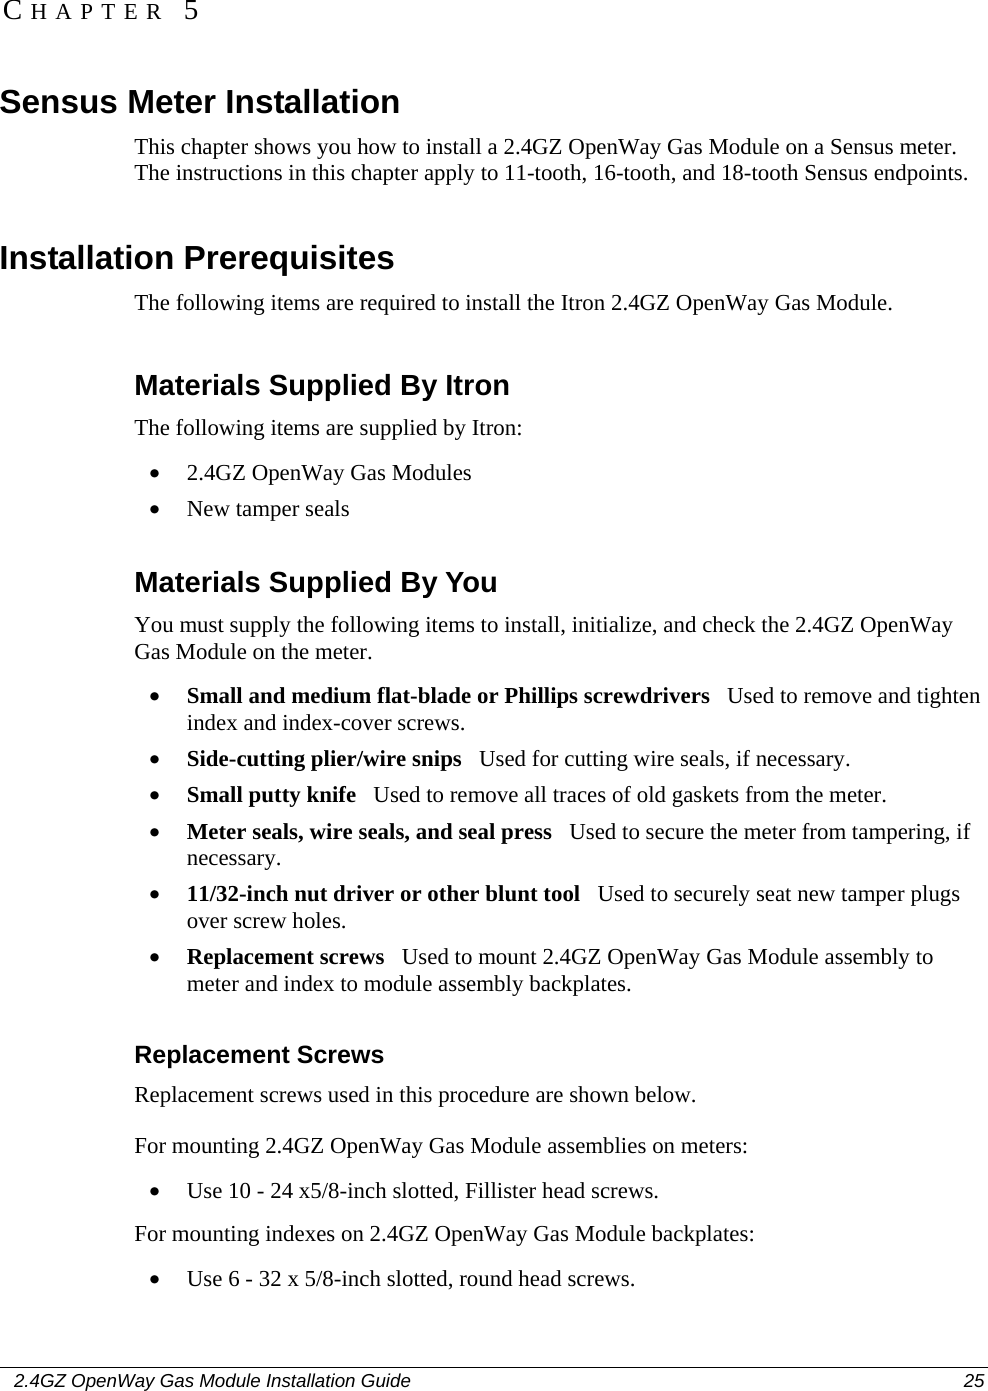    2.4GZ OpenWay Gas Module Installation Guide  25  Sensus Meter Installation This chapter shows you how to install a 2.4GZ OpenWay Gas Module on a Sensus meter. The instructions in this chapter apply to 11-tooth, 16-tooth, and 18-tooth Sensus endpoints.  Installation Prerequisites The following items are required to install the Itron 2.4GZ OpenWay Gas Module.  Materials Supplied By Itron The following items are supplied by Itron: • 2.4GZ OpenWay Gas Modules • New tamper seals  Materials Supplied By You You must supply the following items to install, initialize, and check the 2.4GZ OpenWay Gas Module on the meter. • Small and medium flat-blade or Phillips screwdrivers   Used to remove and tighten index and index-cover screws. • Side-cutting plier/wire snips   Used for cutting wire seals, if necessary. • Small putty knife   Used to remove all traces of old gaskets from the meter.  • Meter seals, wire seals, and seal press   Used to secure the meter from tampering, if necessary. • 11/32-inch nut driver or other blunt tool   Used to securely seat new tamper plugs over screw holes.  • Replacement screws   Used to mount 2.4GZ OpenWay Gas Module assembly to meter and index to module assembly backplates.  Replacement Screws Replacement screws used in this procedure are shown below. For mounting 2.4GZ OpenWay Gas Module assemblies on meters: • Use 10 - 24 x5/8-inch slotted, Fillister head screws. For mounting indexes on 2.4GZ OpenWay Gas Module backplates: • Use 6 - 32 x 5/8-inch slotted, round head screws.  CHAPTER 5 